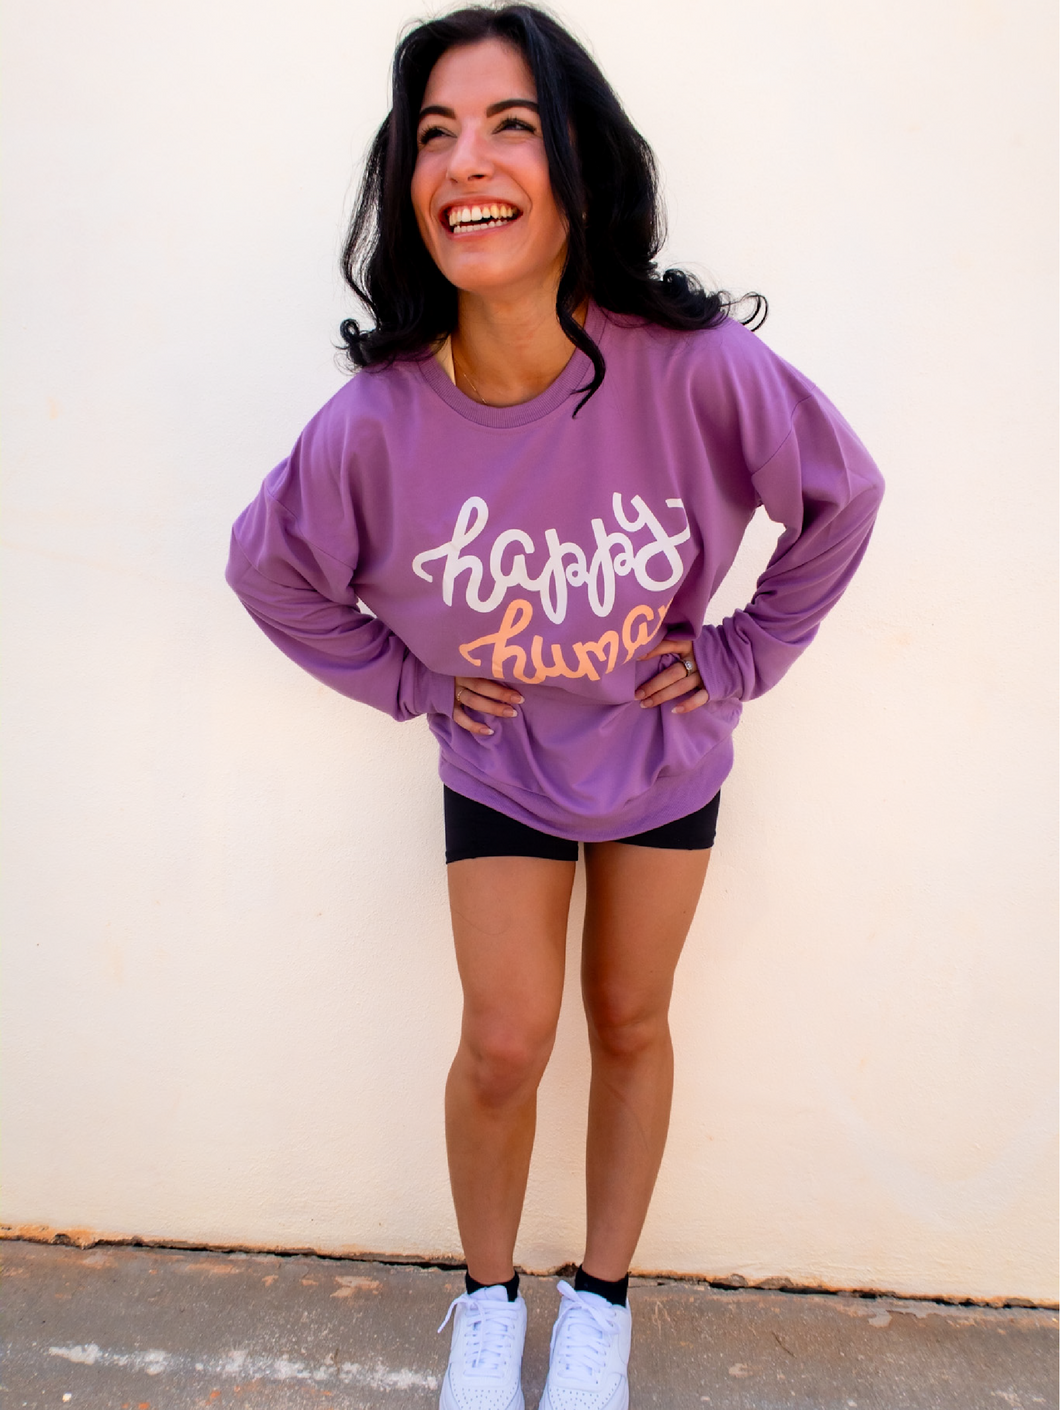 Young lady modeling a purple lightweight, crewneck sweatshirt with a hand-lettered script design saying 